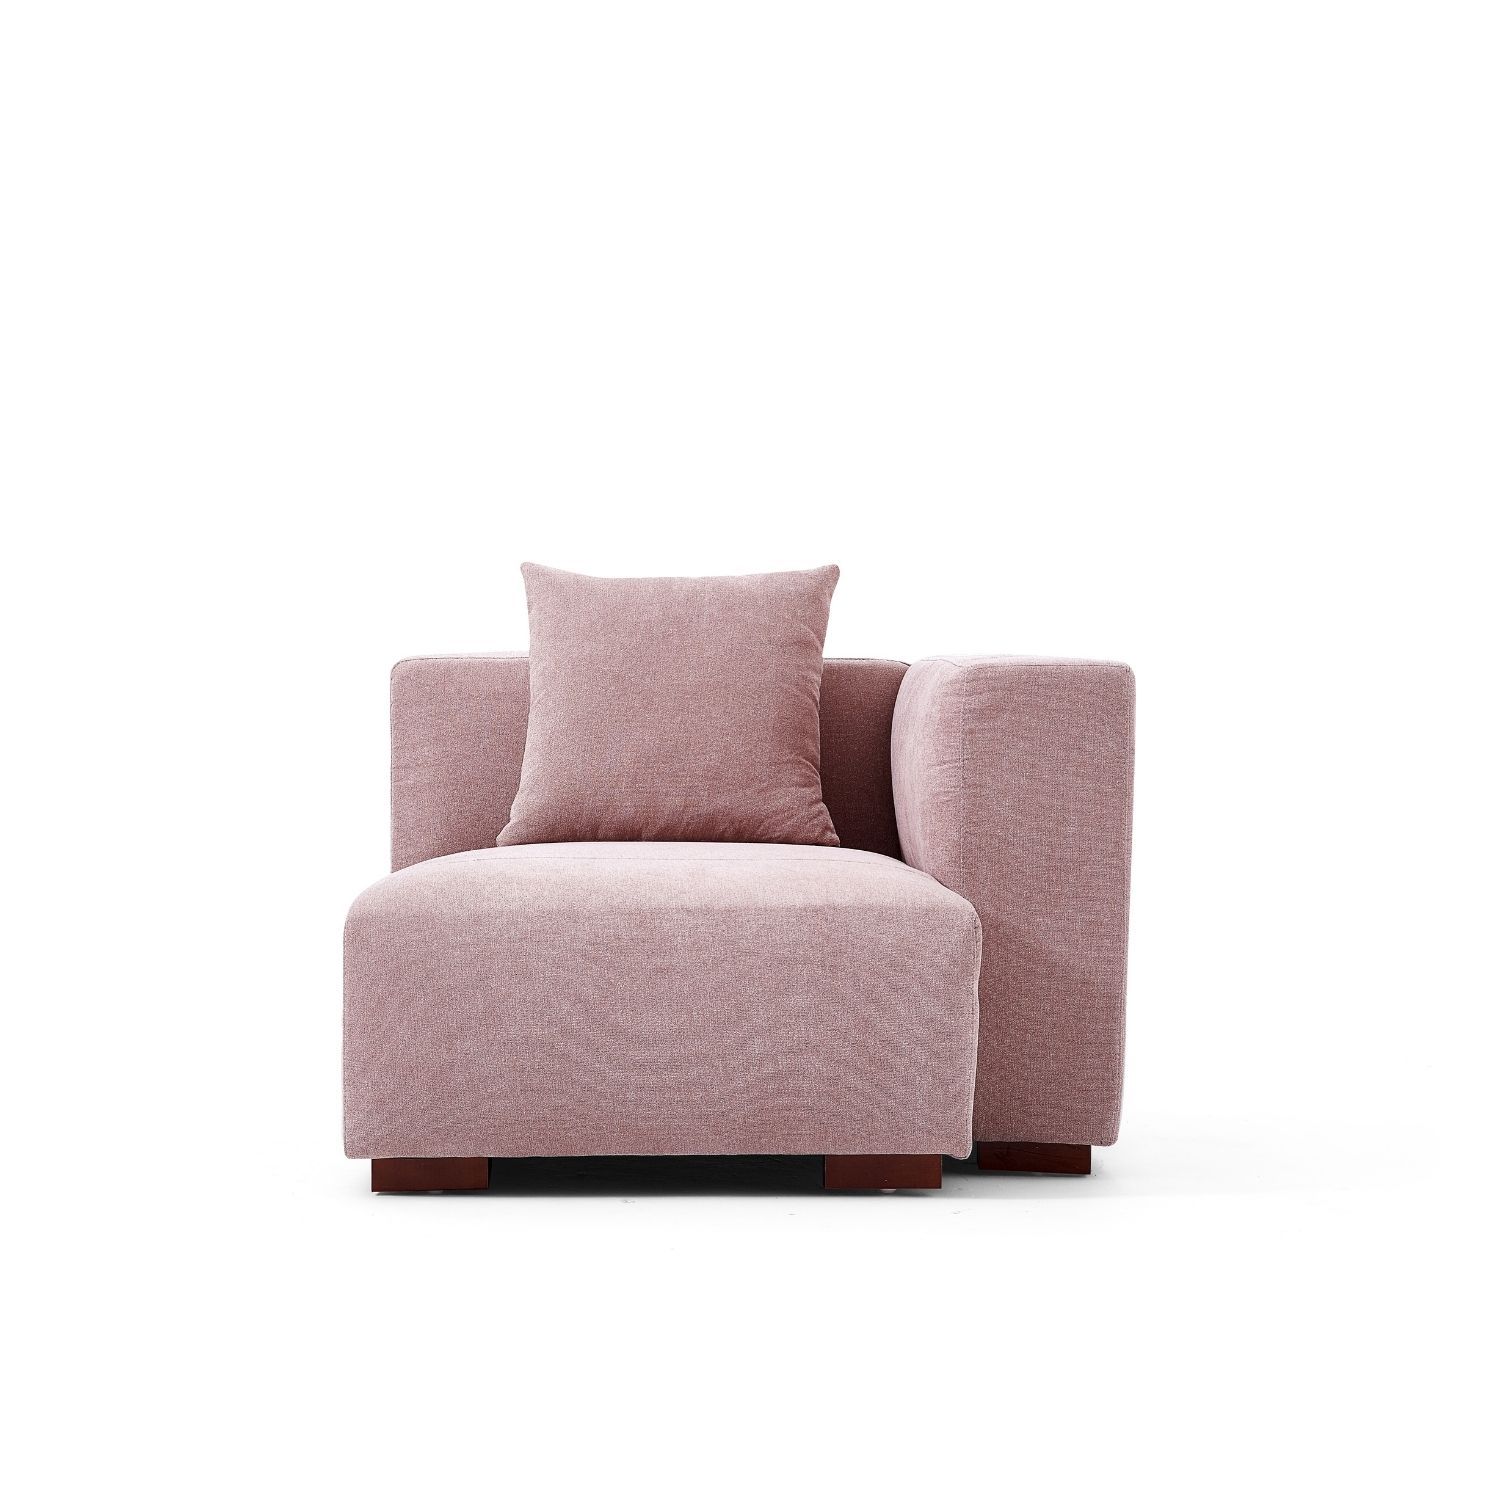 Valmolar - Chase Sofa OHDOME Nude Pink Facing right 